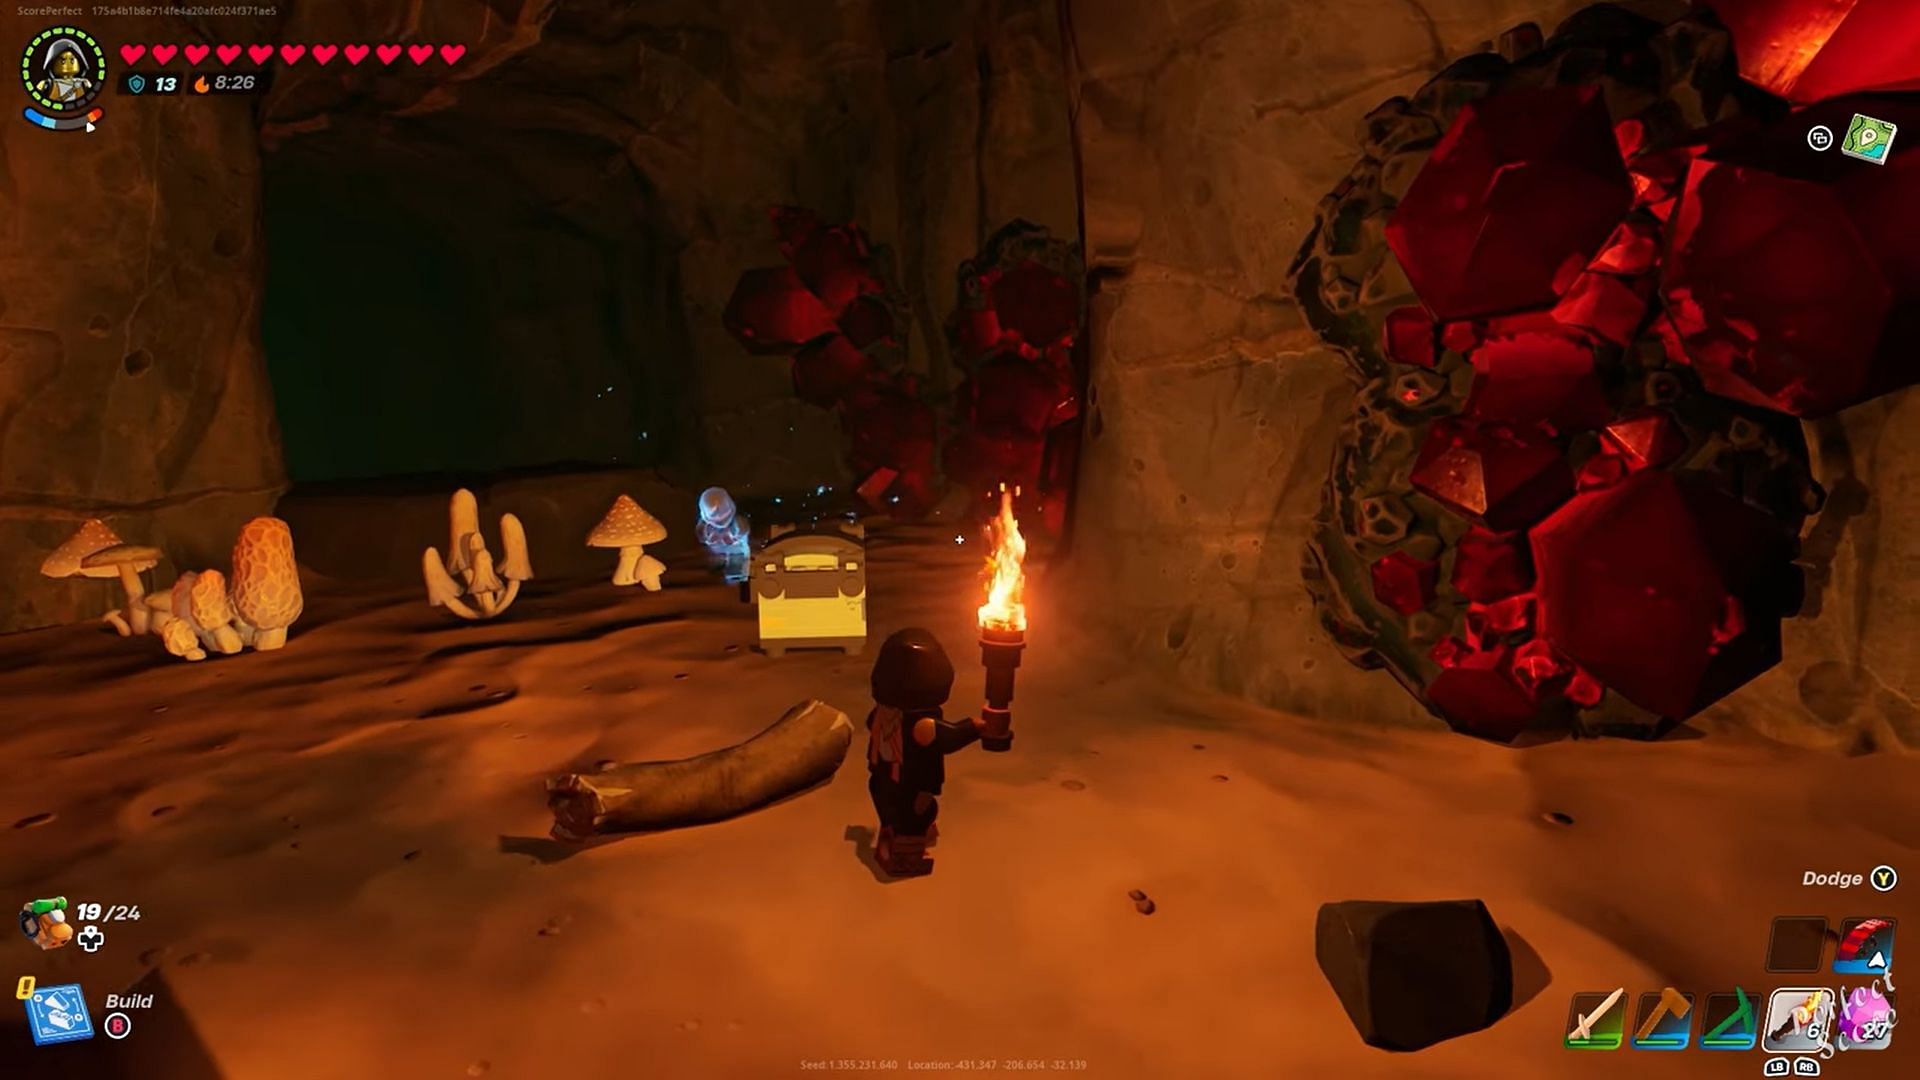 Rough Ruby in Desert Caves (Image via Epic Games/Perfect Score on YouTube)